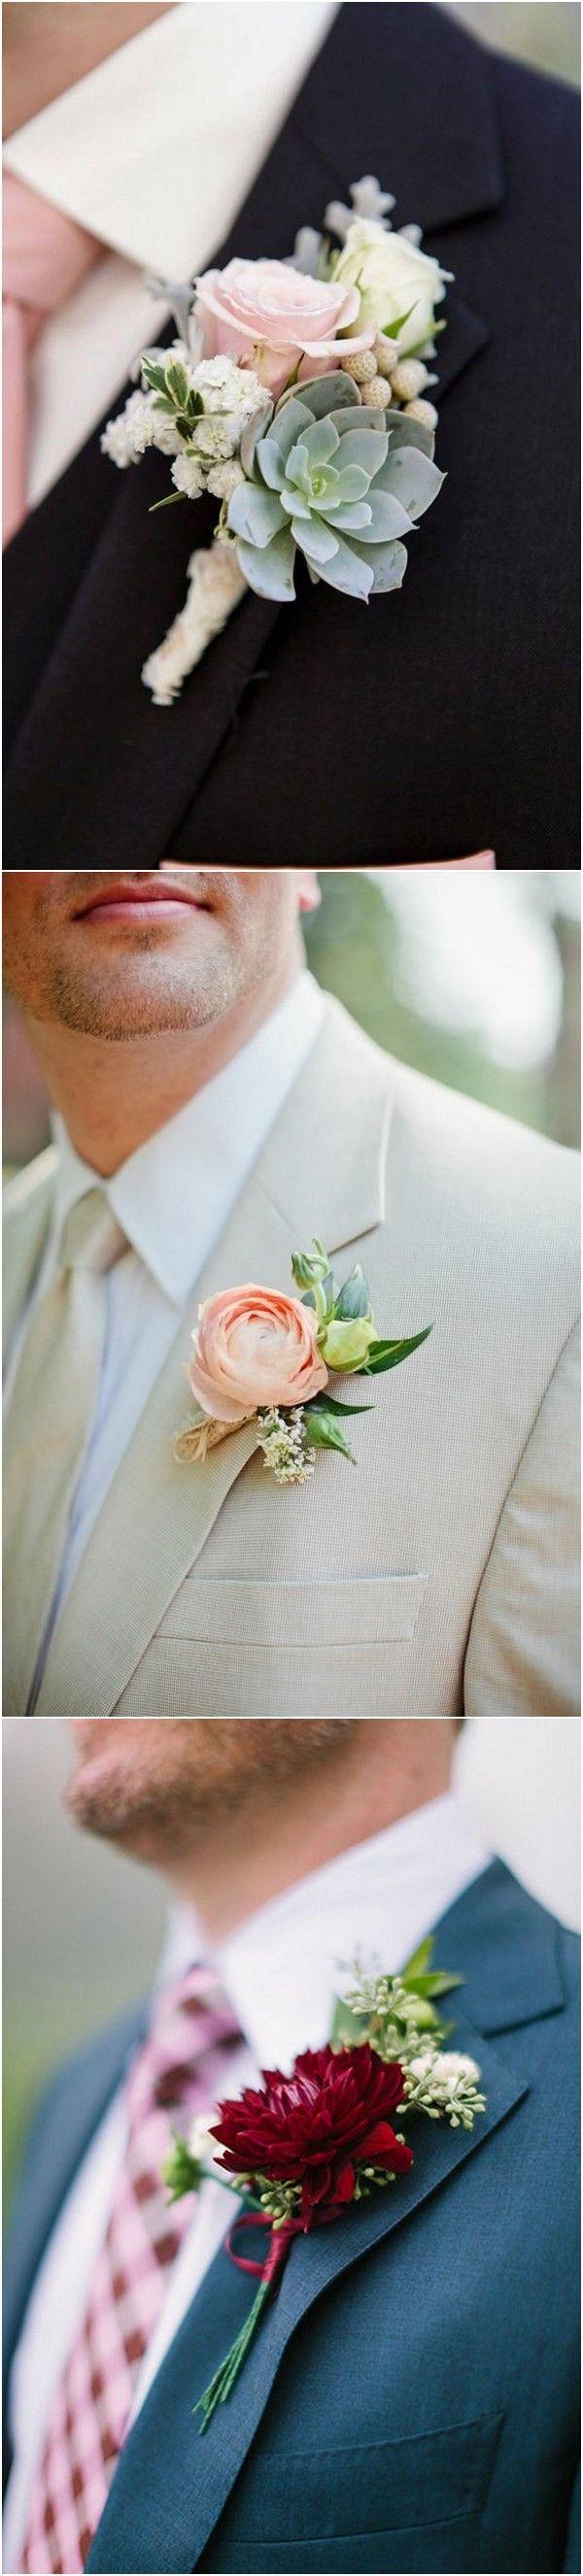 Wedding - 20 Fabulous Wedding Boutonnieres For Groom And Groomsmen - Page 2 Of 3